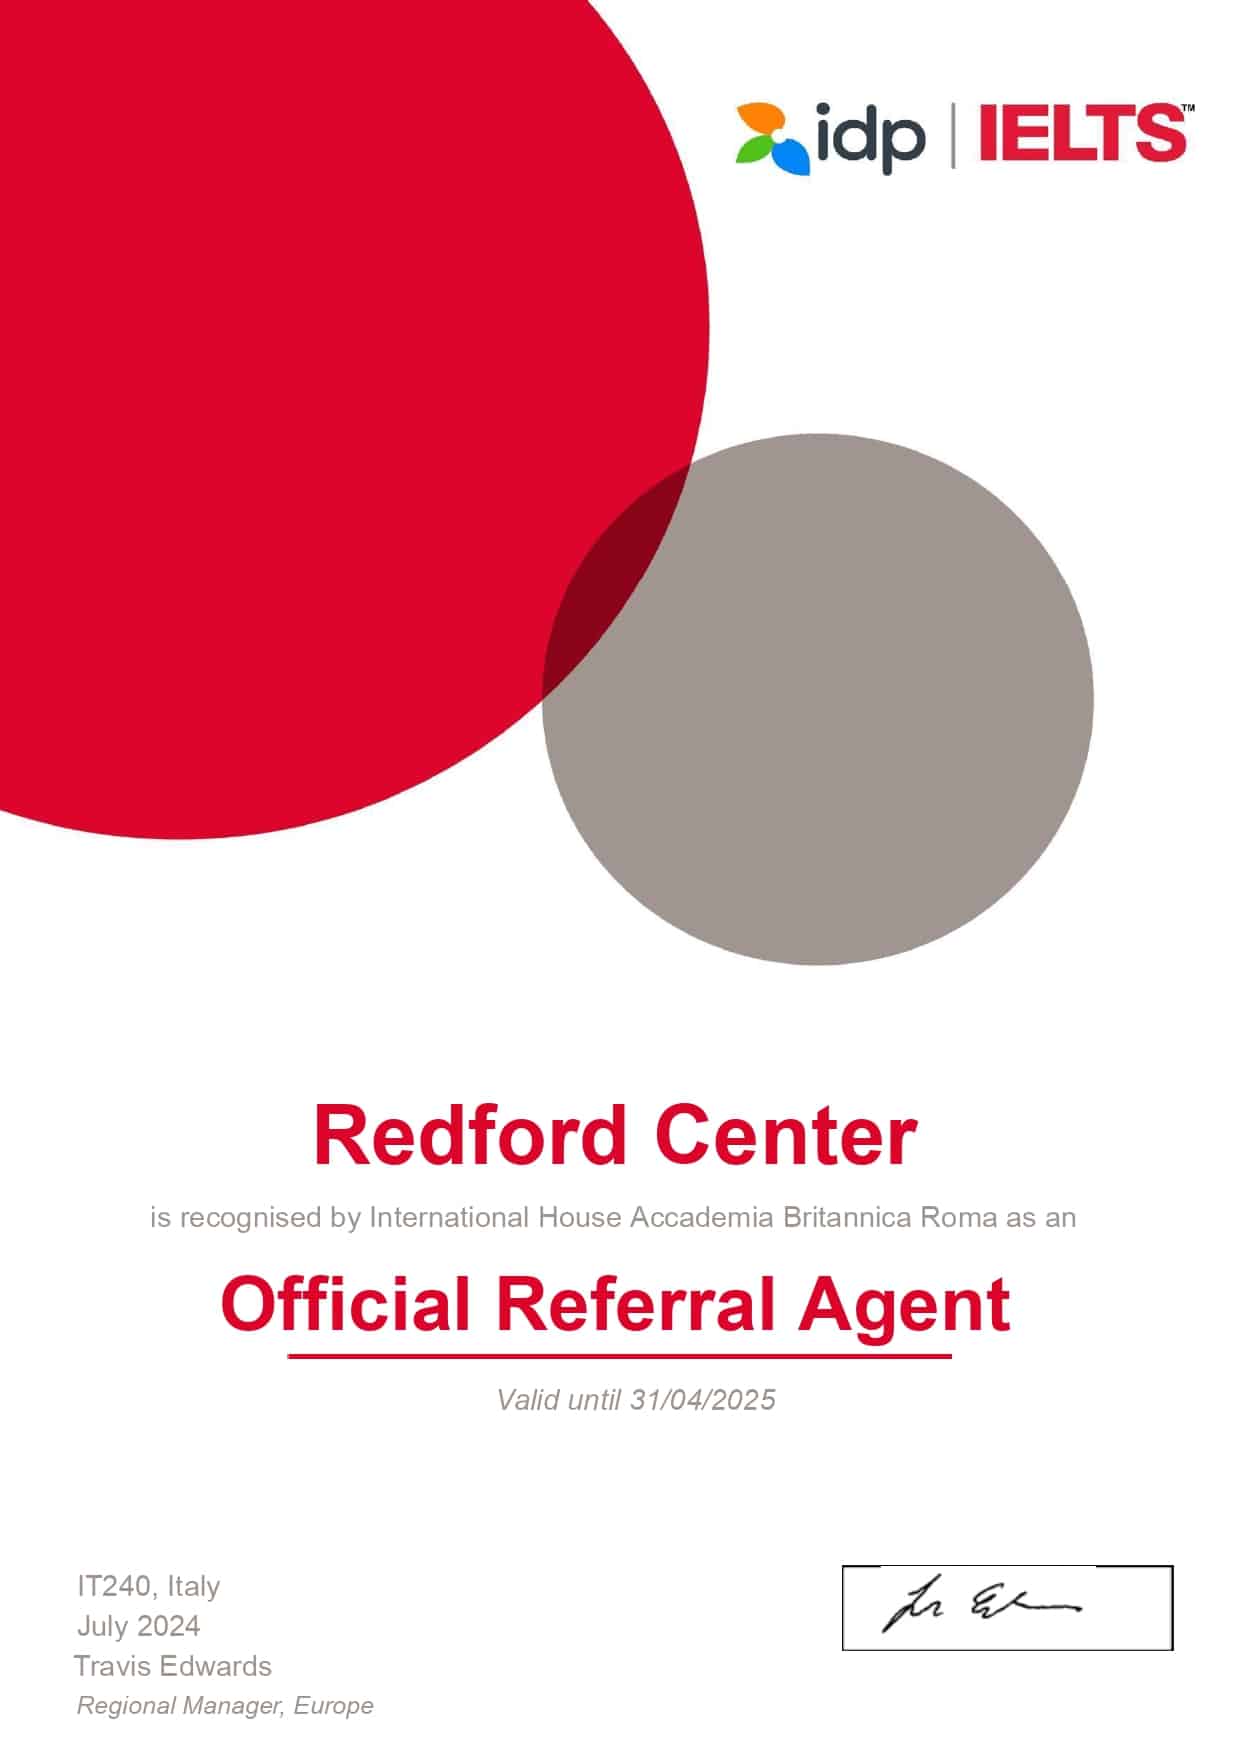 IELTS_Certificate_Referral-Agent_REFORD 2023.docx (1)_pages-to-jpg-0001